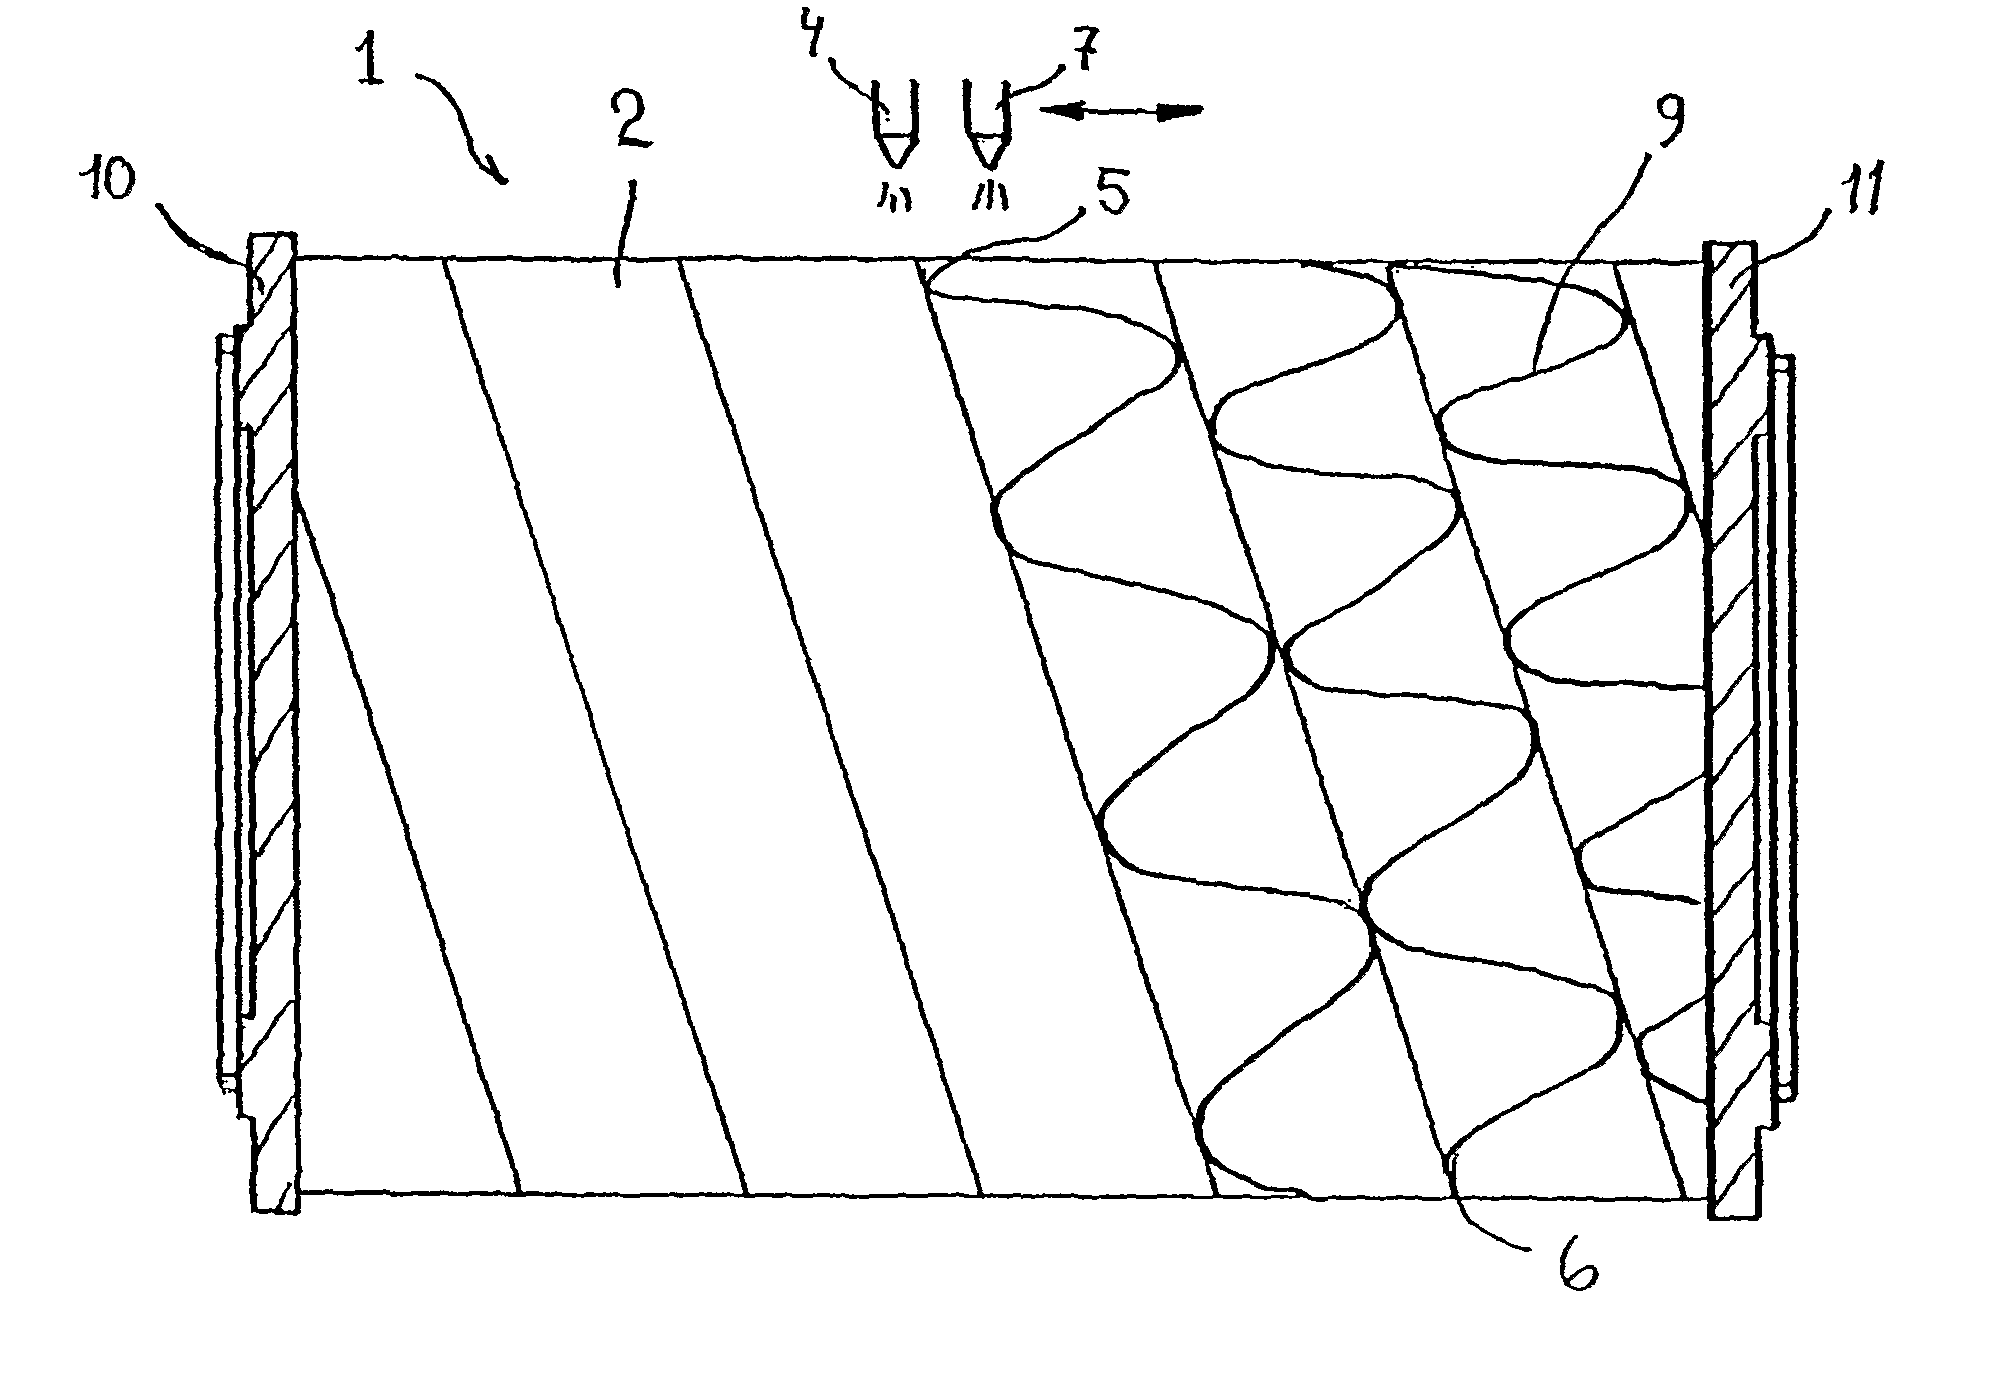 Method of manufacturing a filter element